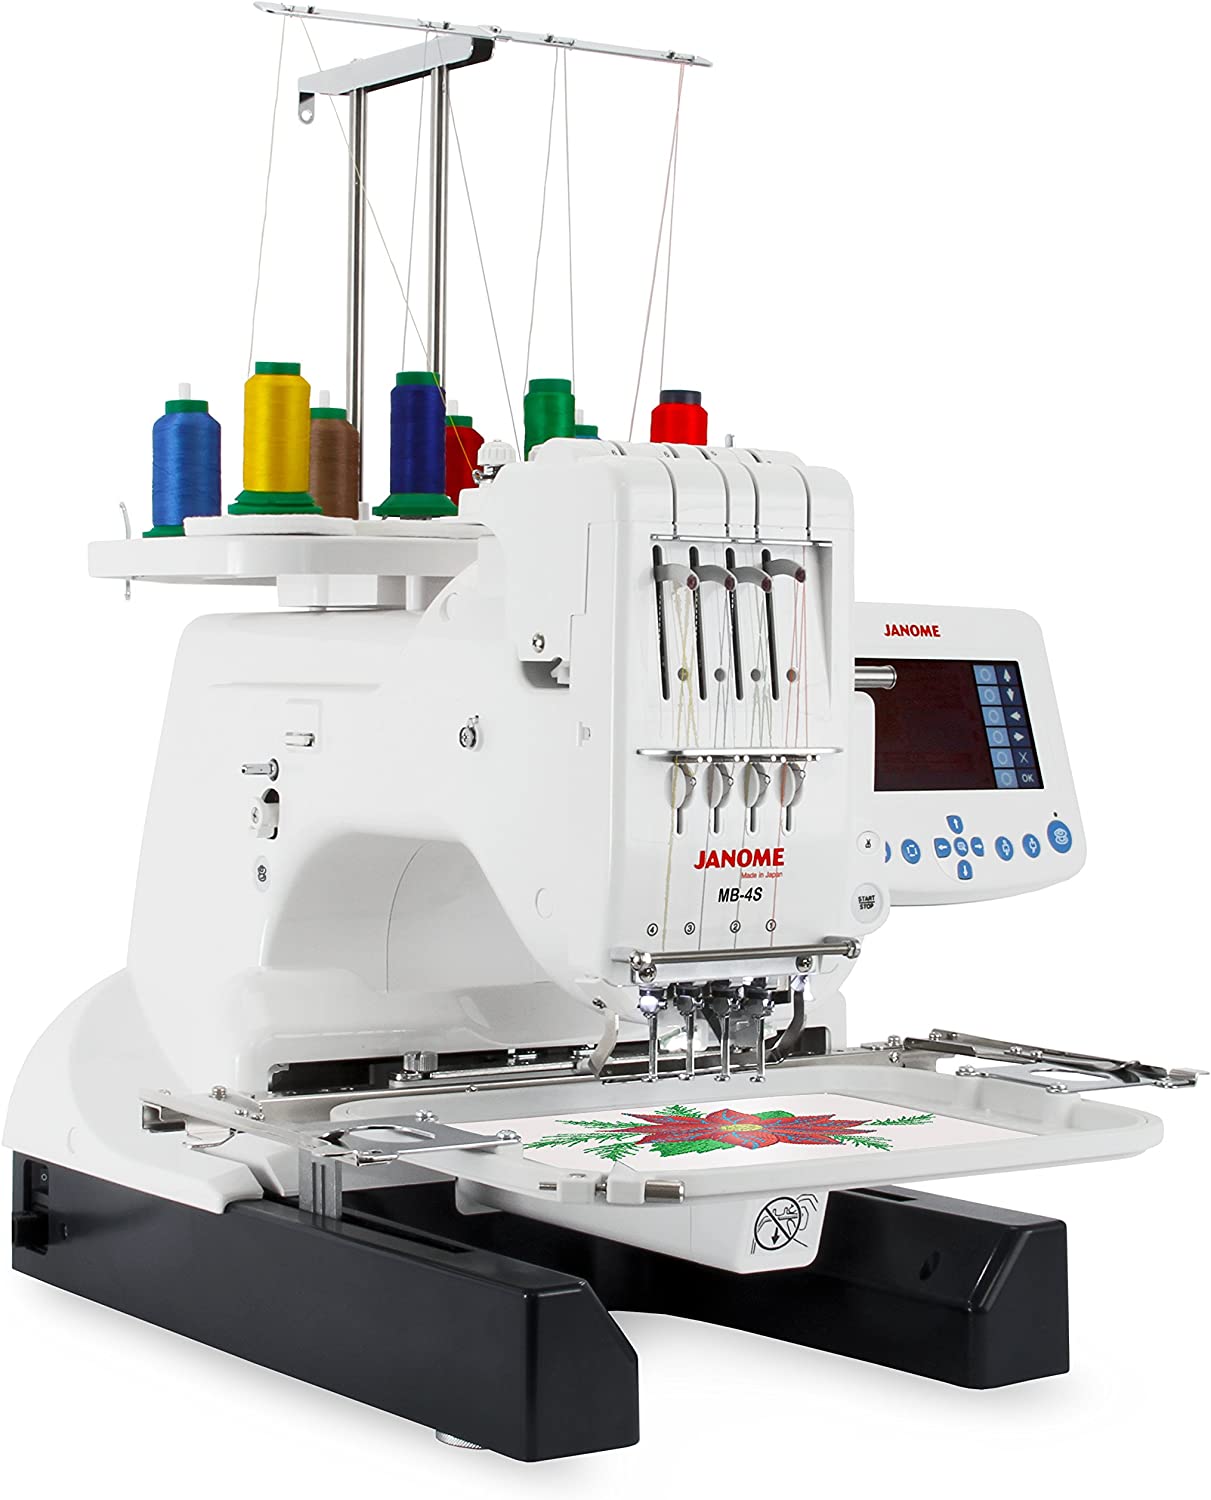 Janome MB-4S with accessories